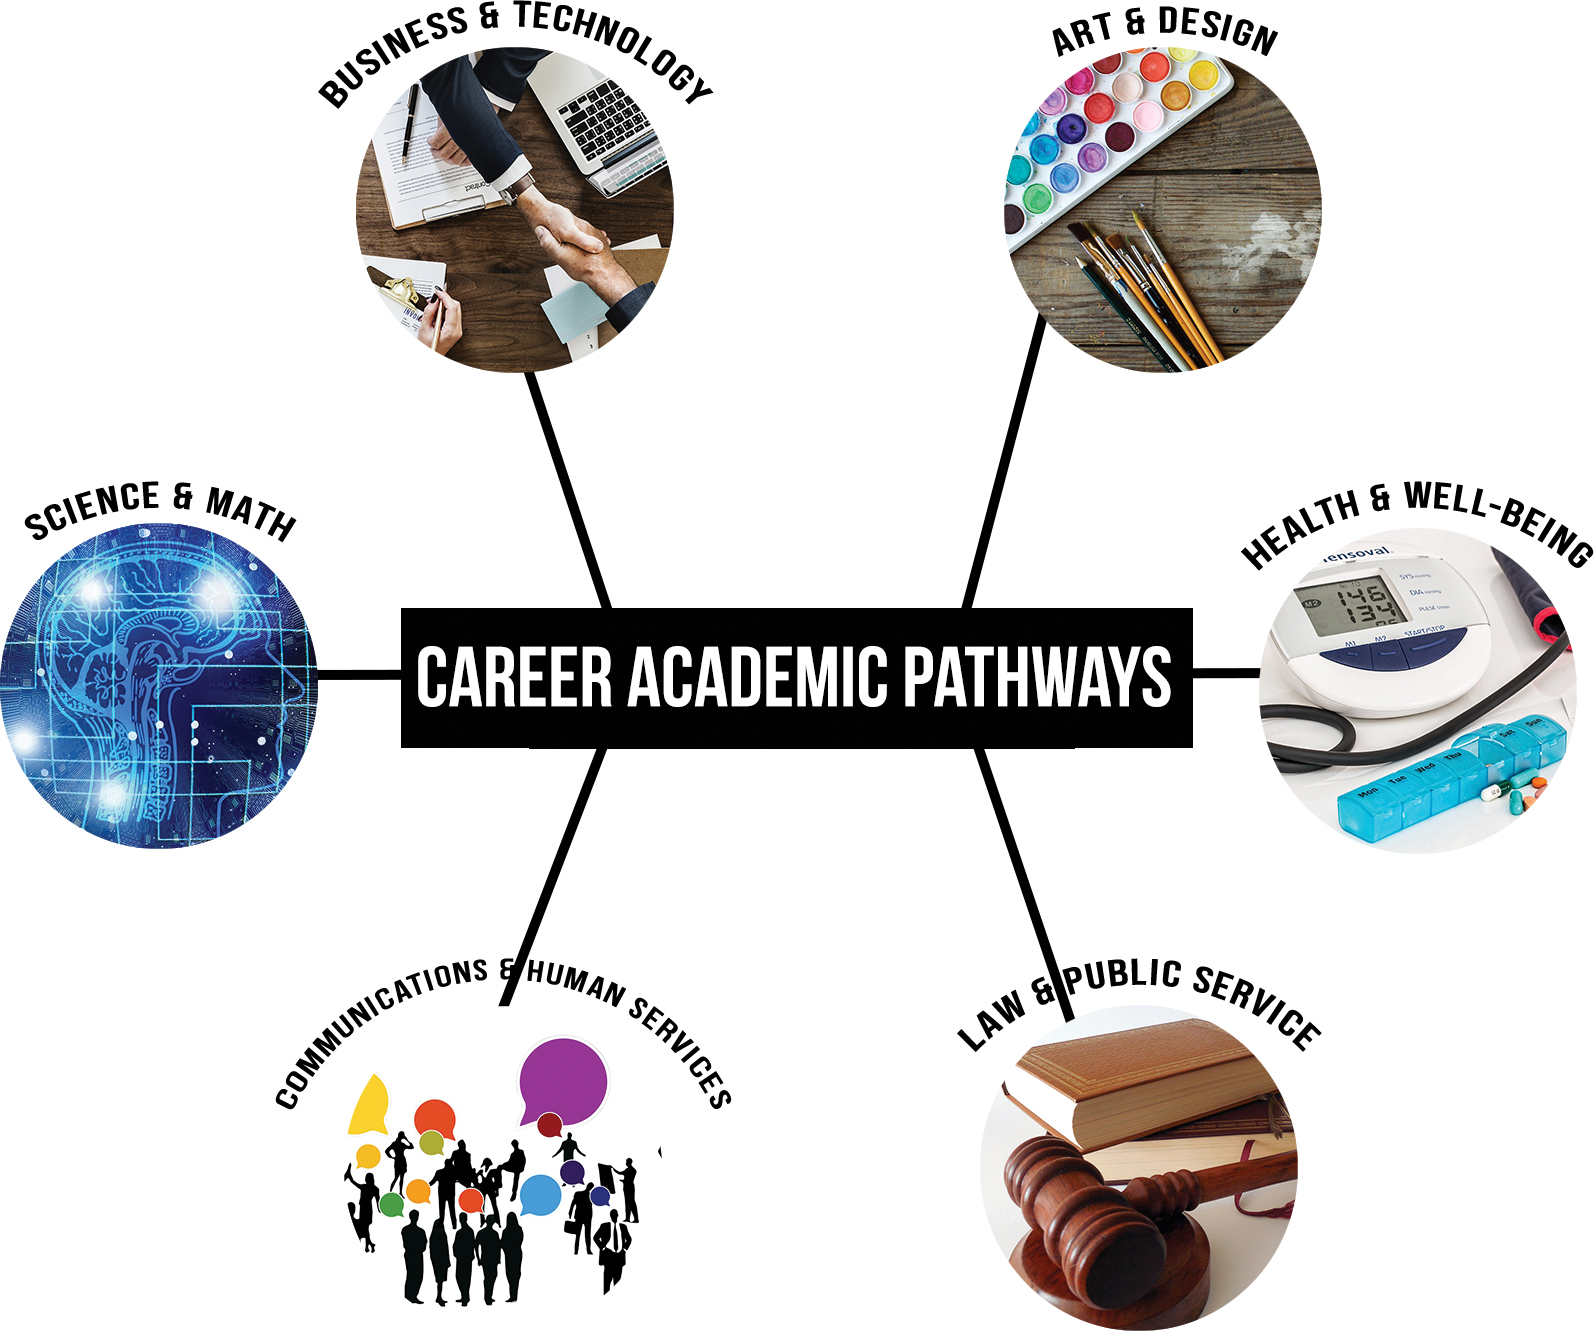 Guided Pathways brings clarity to majors